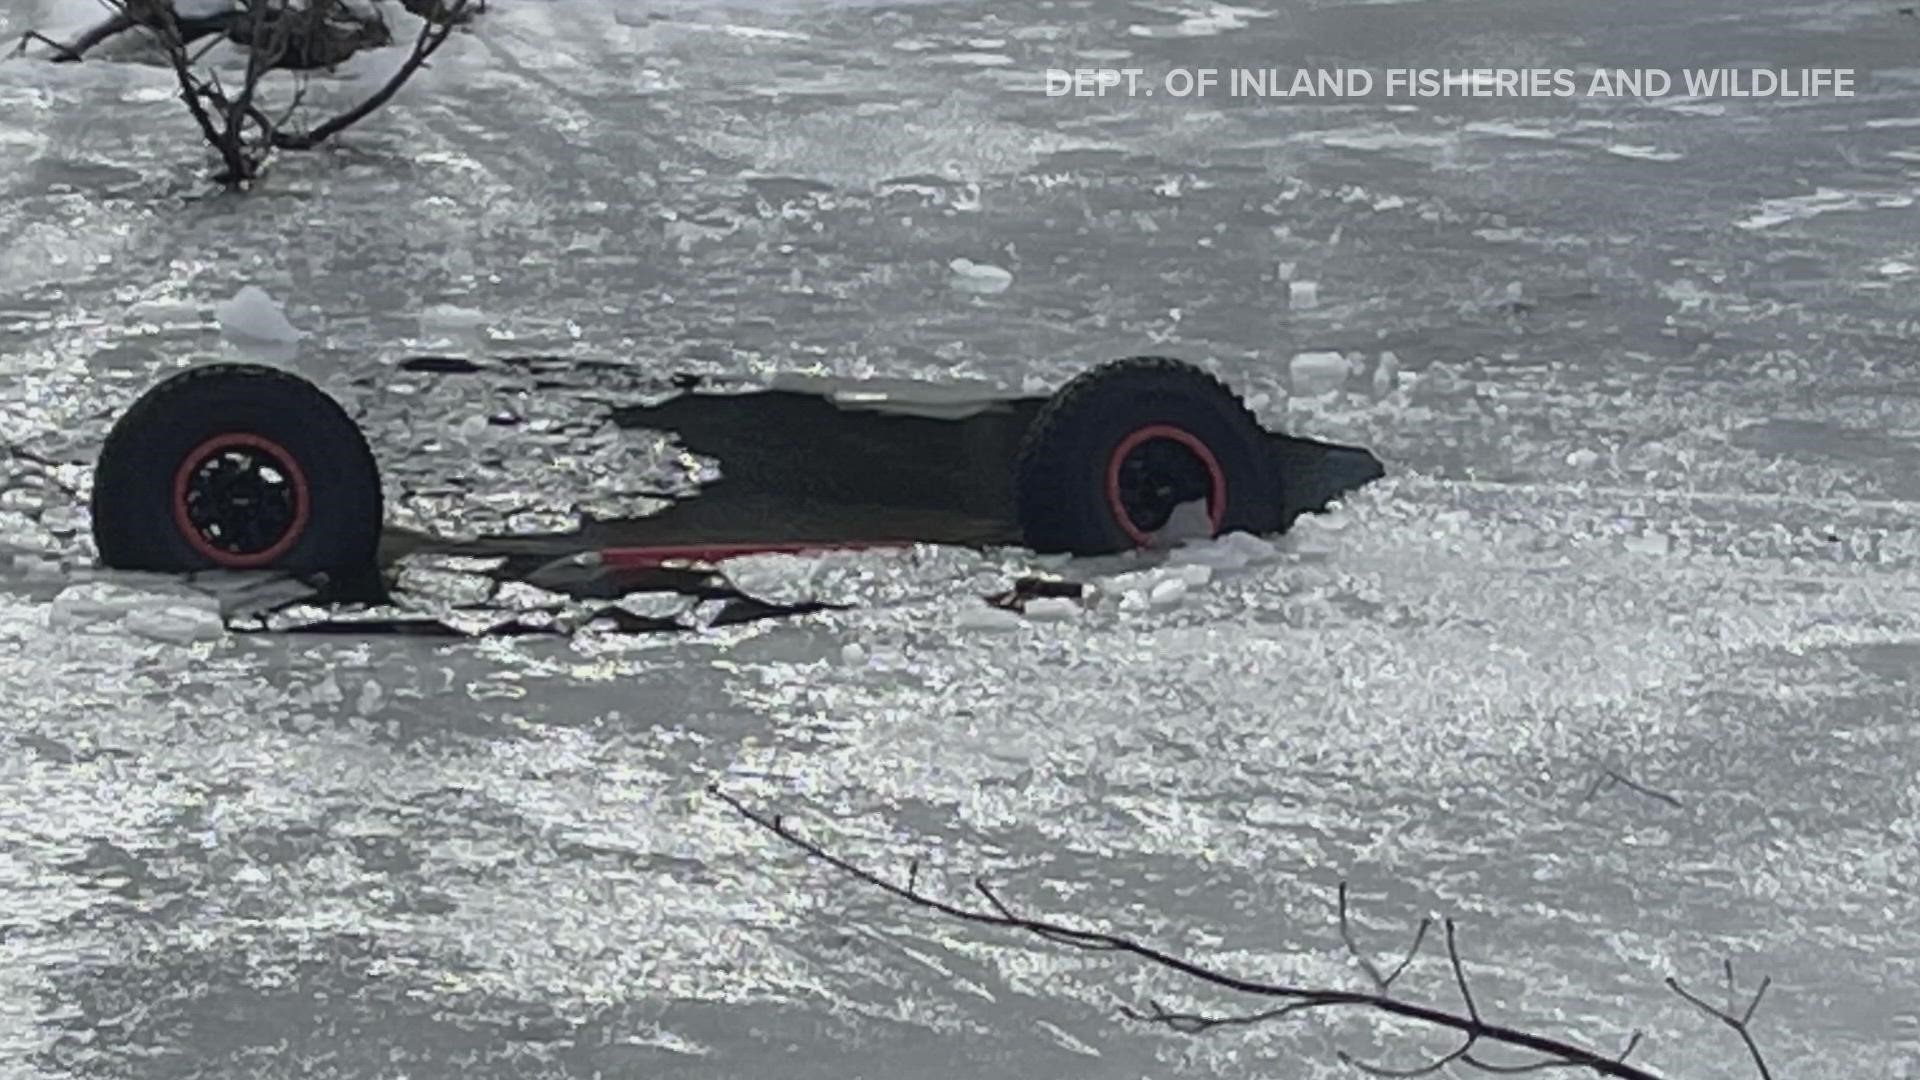 Around 10:30 a.m. Sunday, two men were driving a Can-Am 1000 UTV on Bartlett Stream when they broke through the ice.